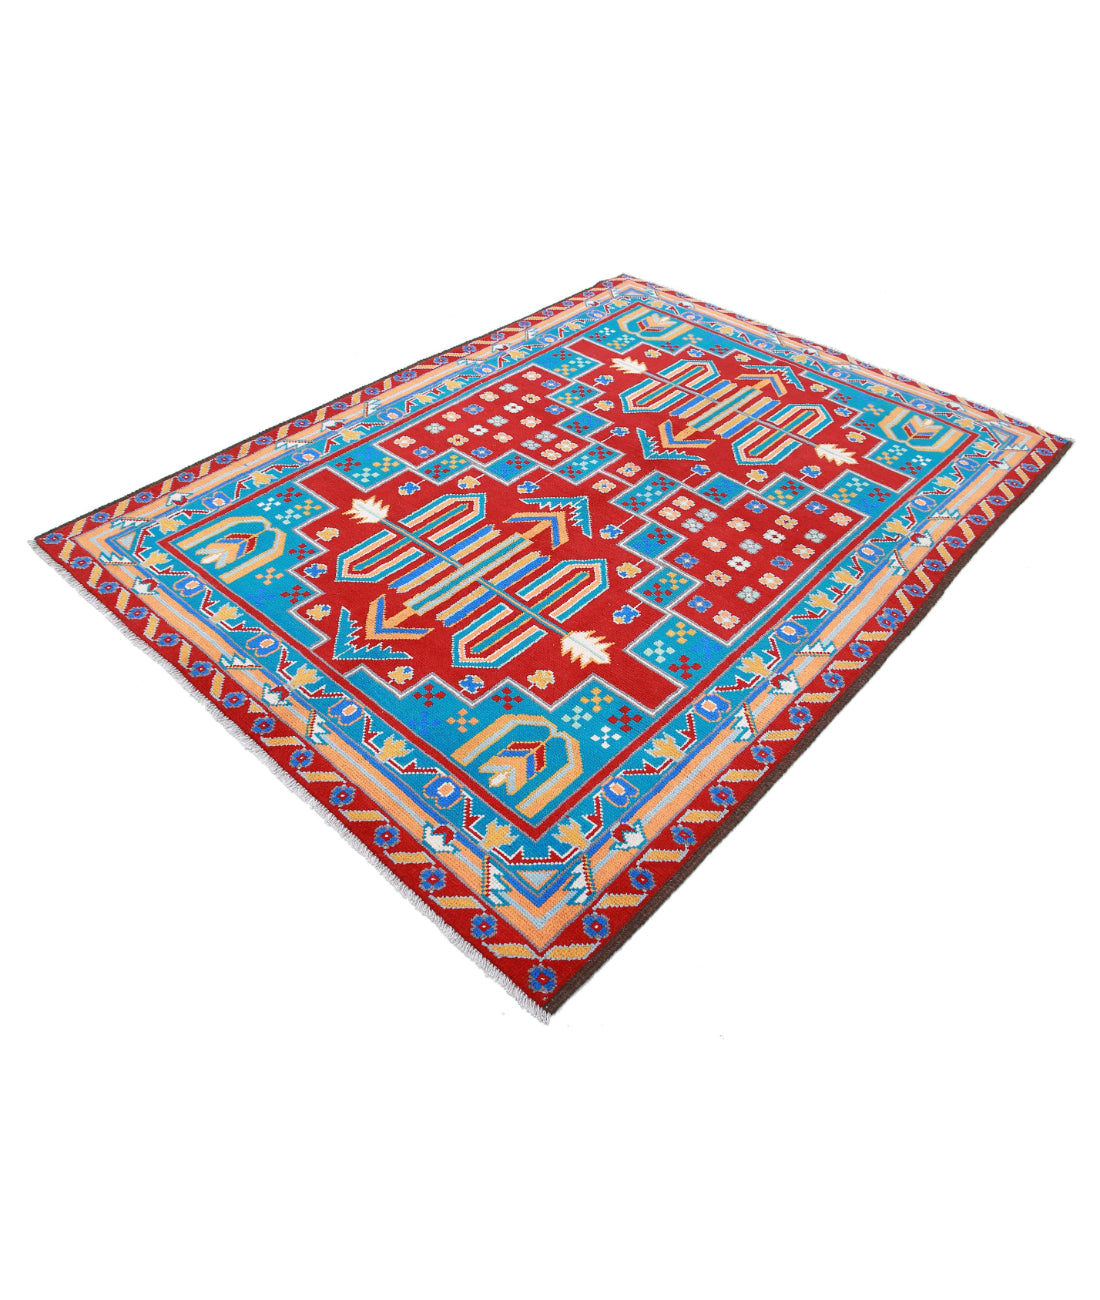 Revival 5'7'' X 7'7'' Hand-Knotted Wool Rug 5'7'' x 7'7'' (168 X 228) / Red / Blue